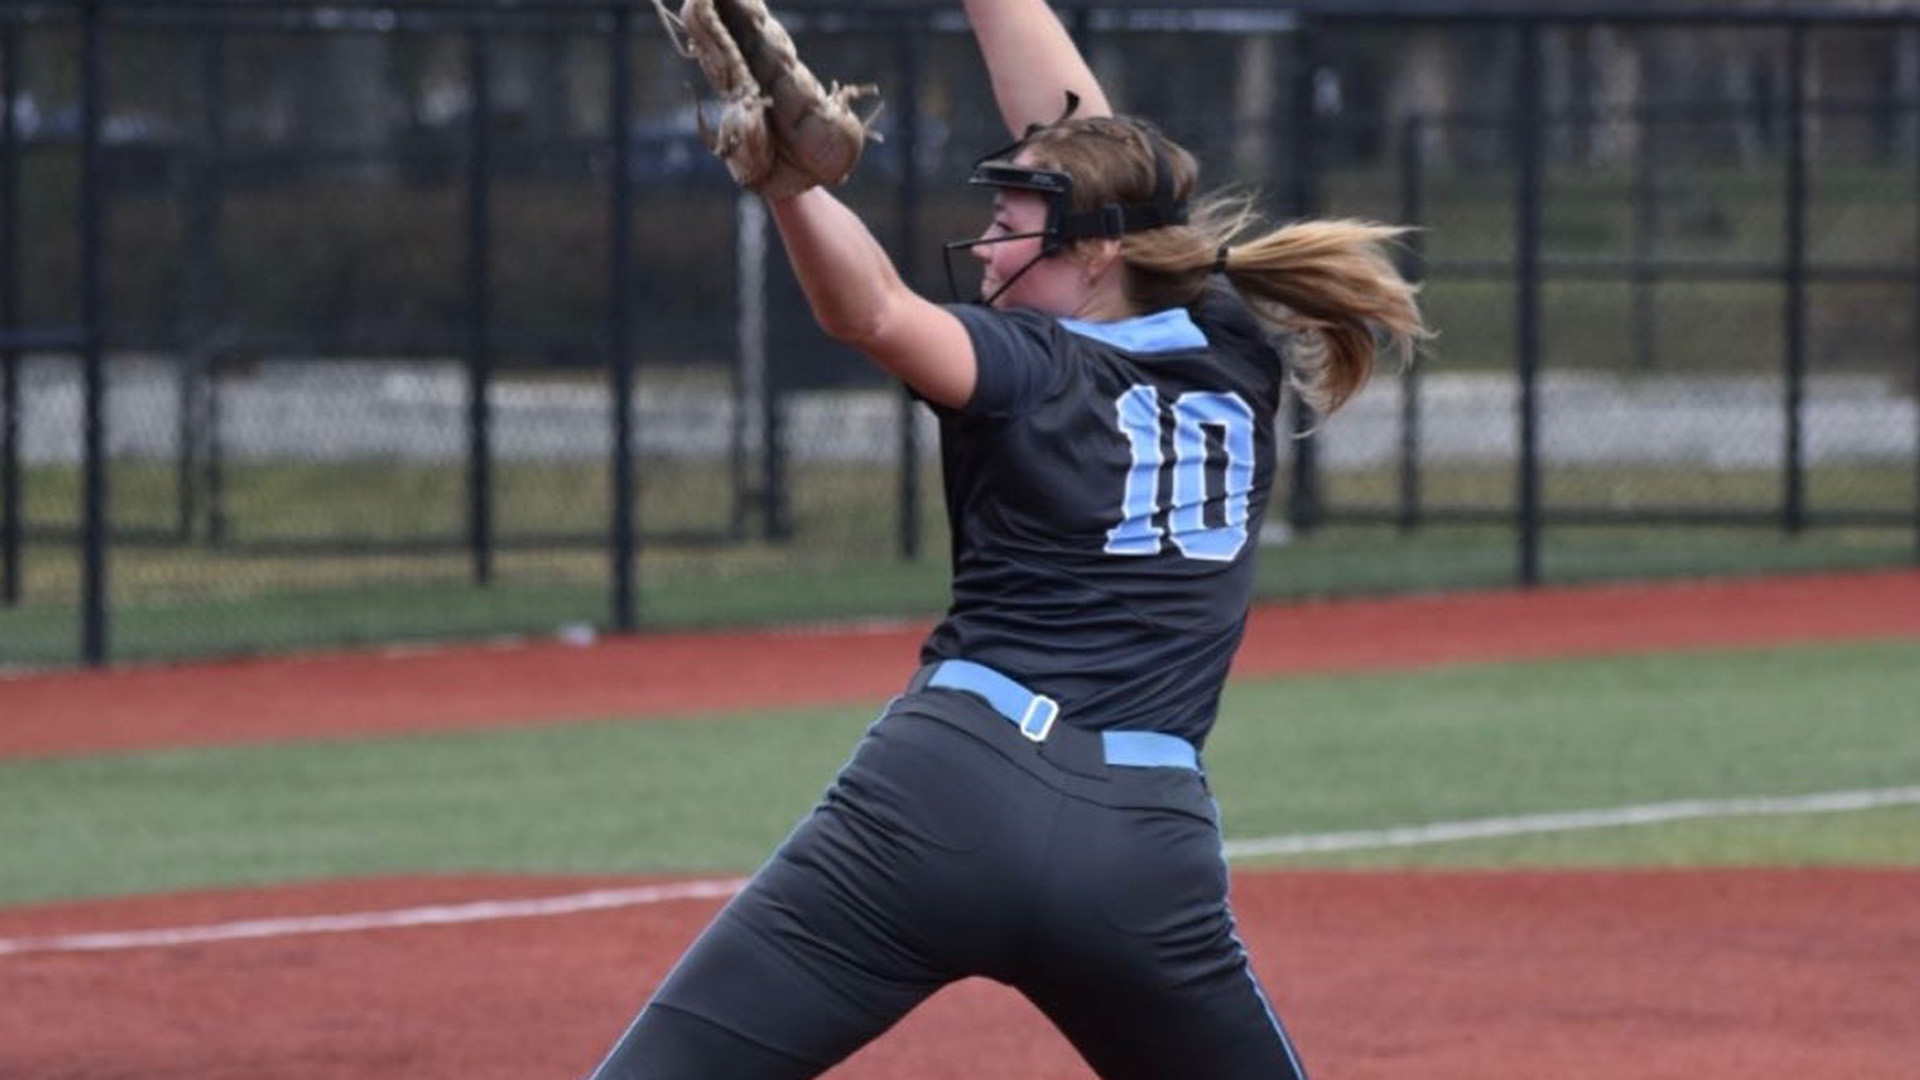 Shipley picked for RSC Softball Player of the Week